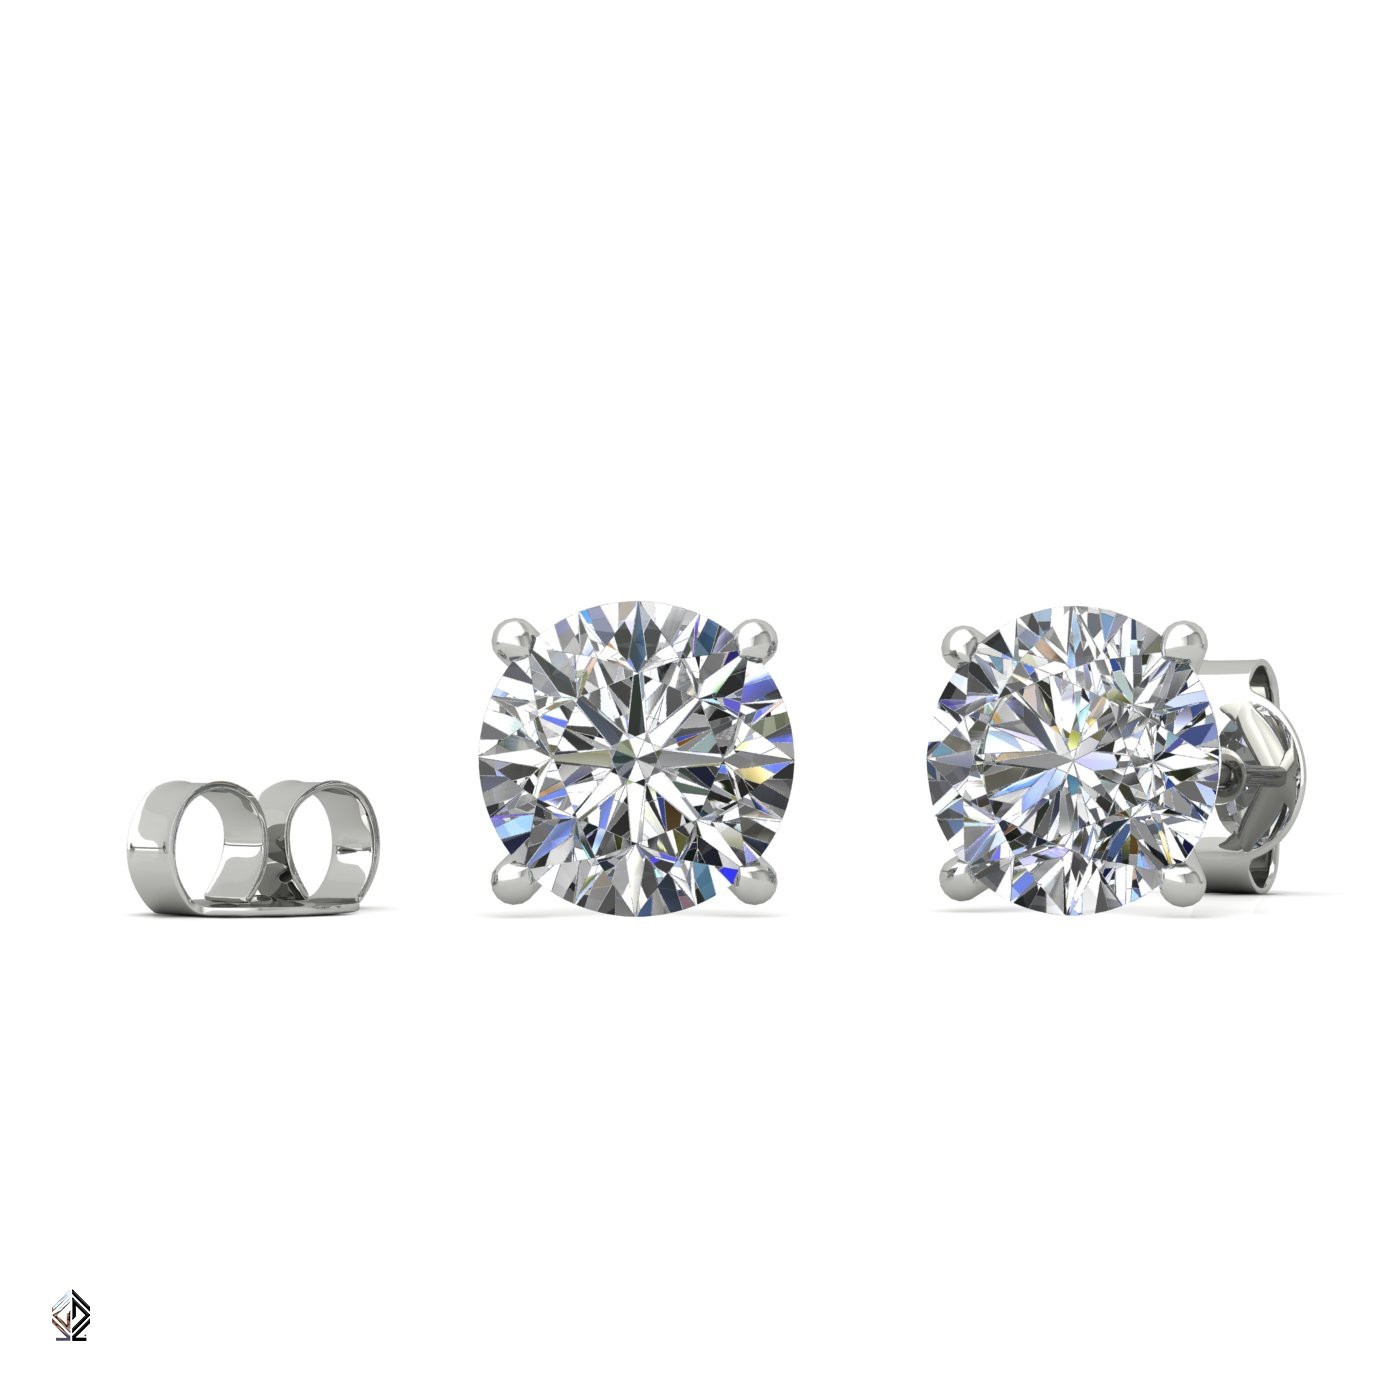 18k white gold 1.0 ct each (2,0 tcw) 4 prongs round cut classic diamond earring studs Photos & images